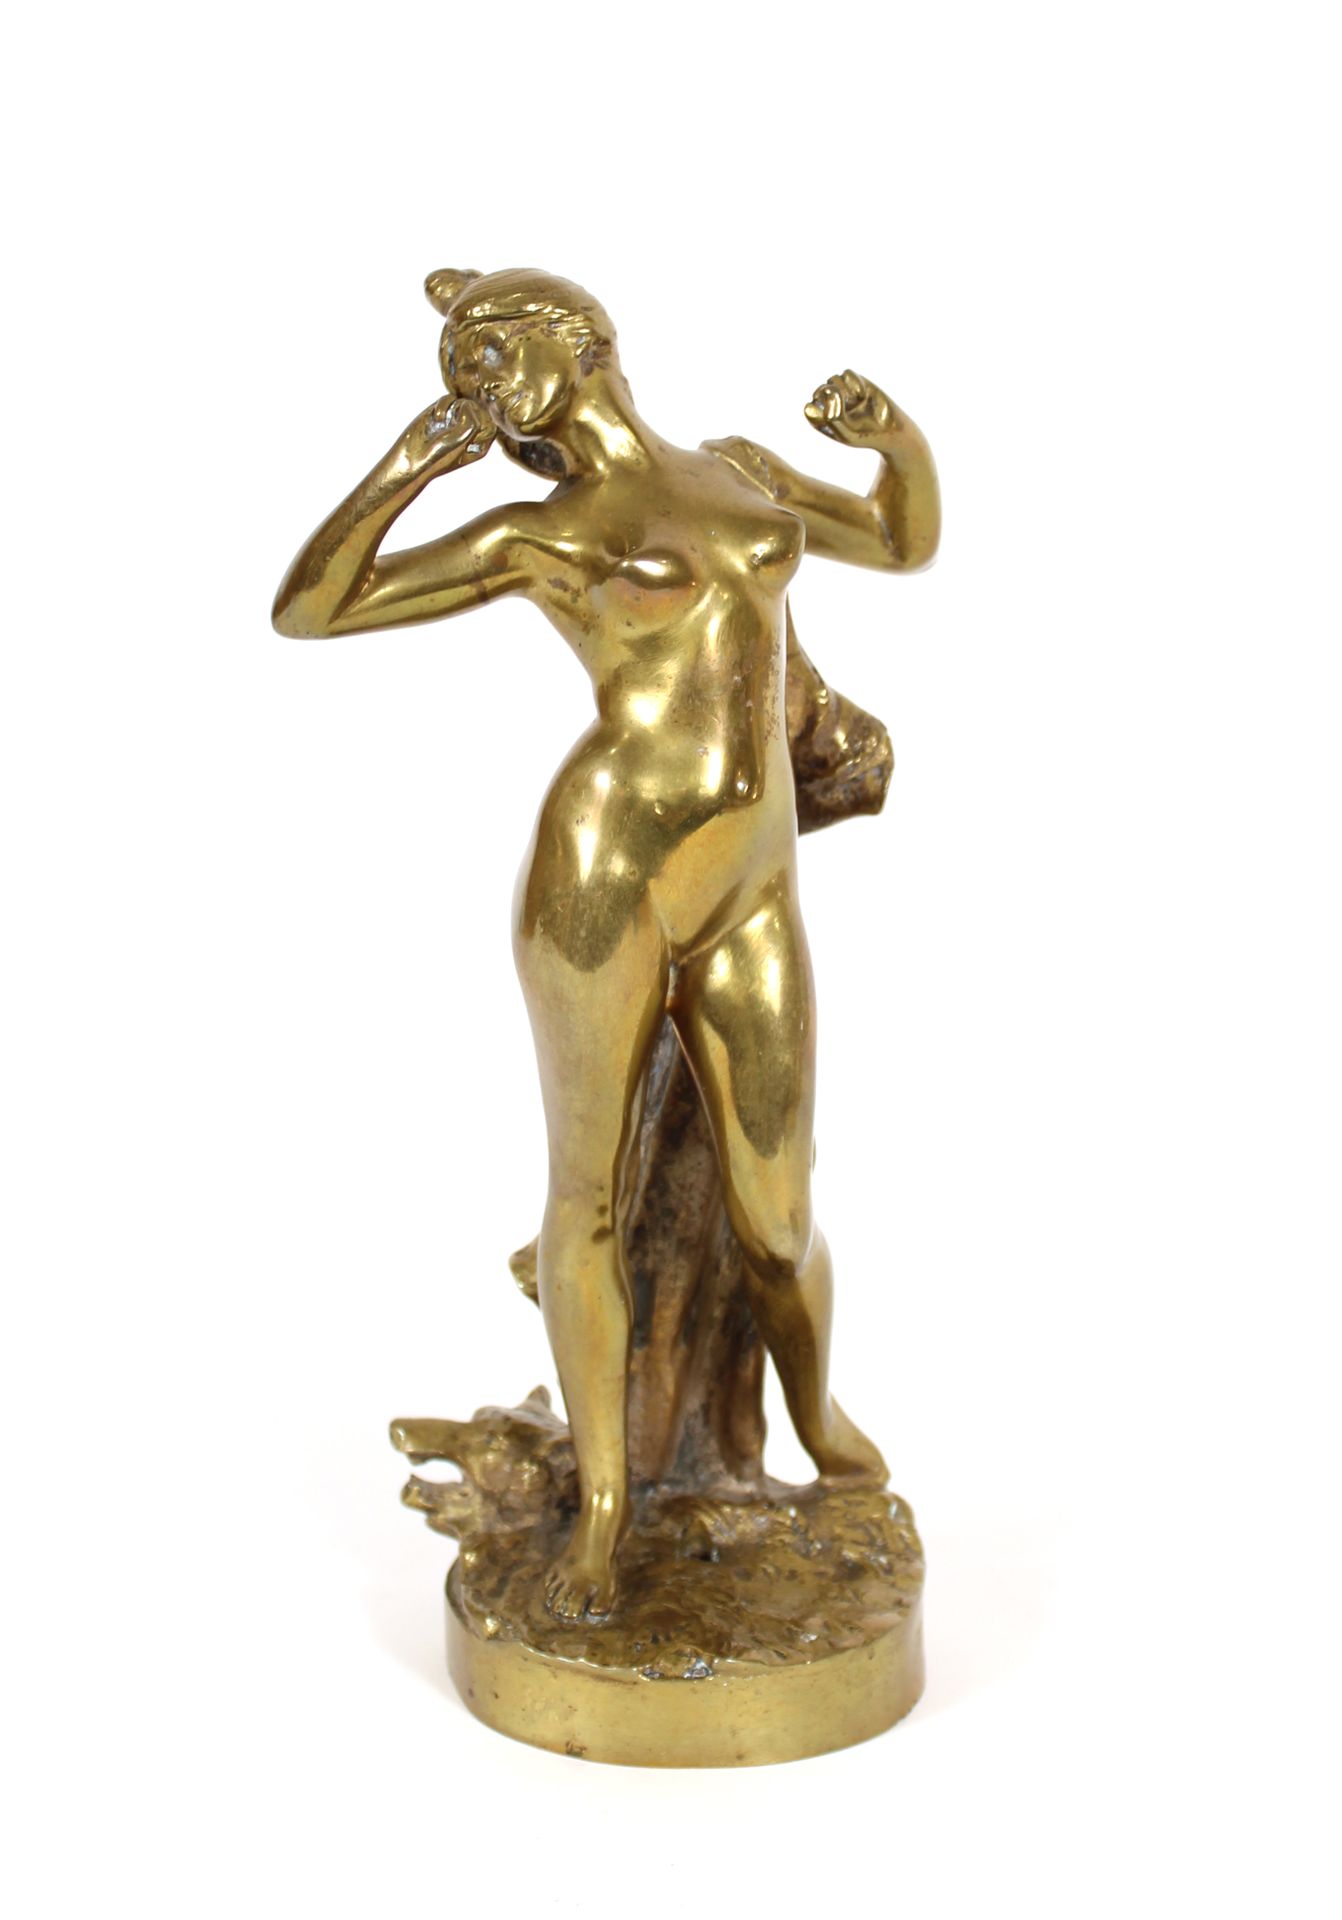 Null After Urbain BASSET
Woman awakening
Bronze with gilded patina, signed
H. 21&hellip;